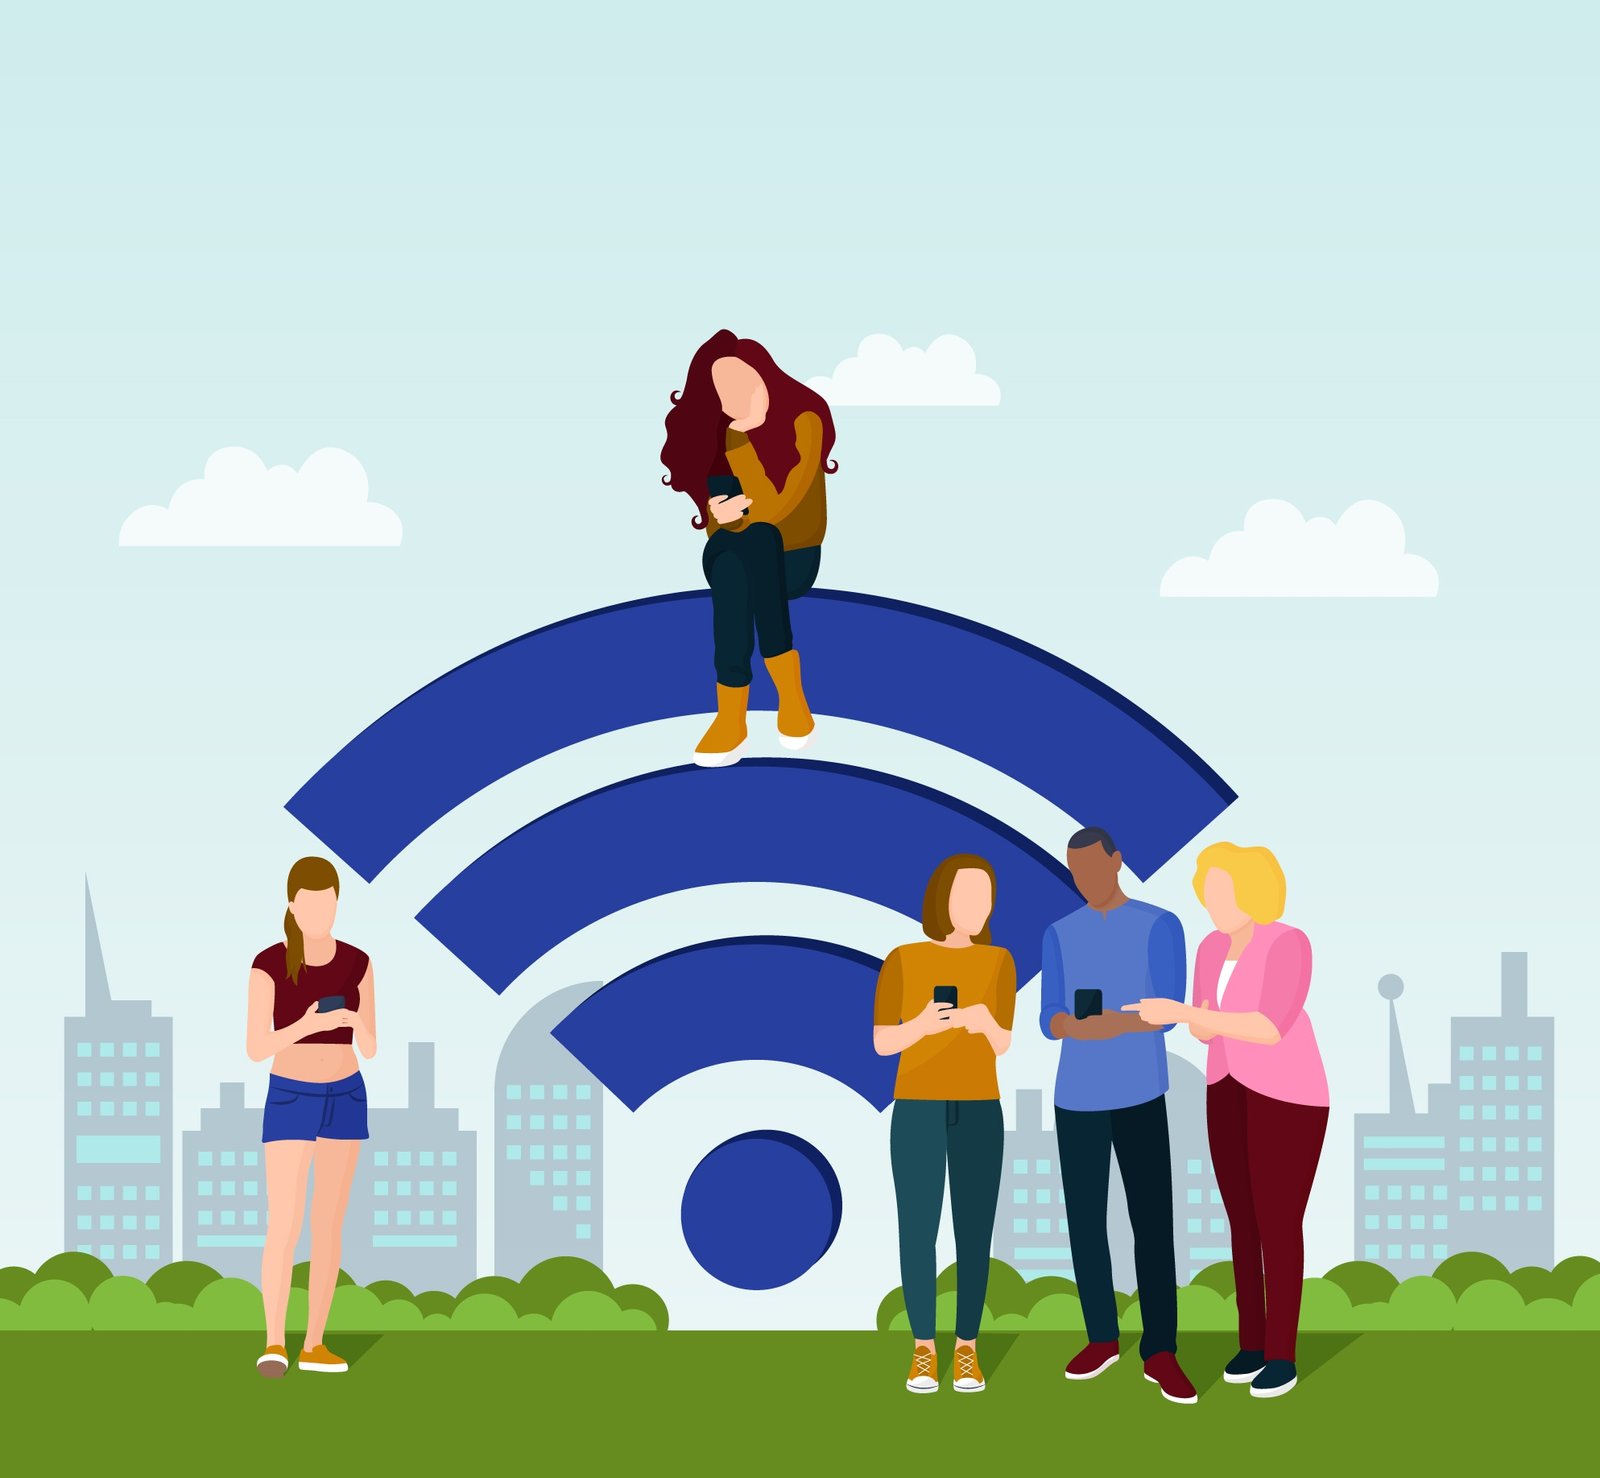 How to use public Wi-Fi safely